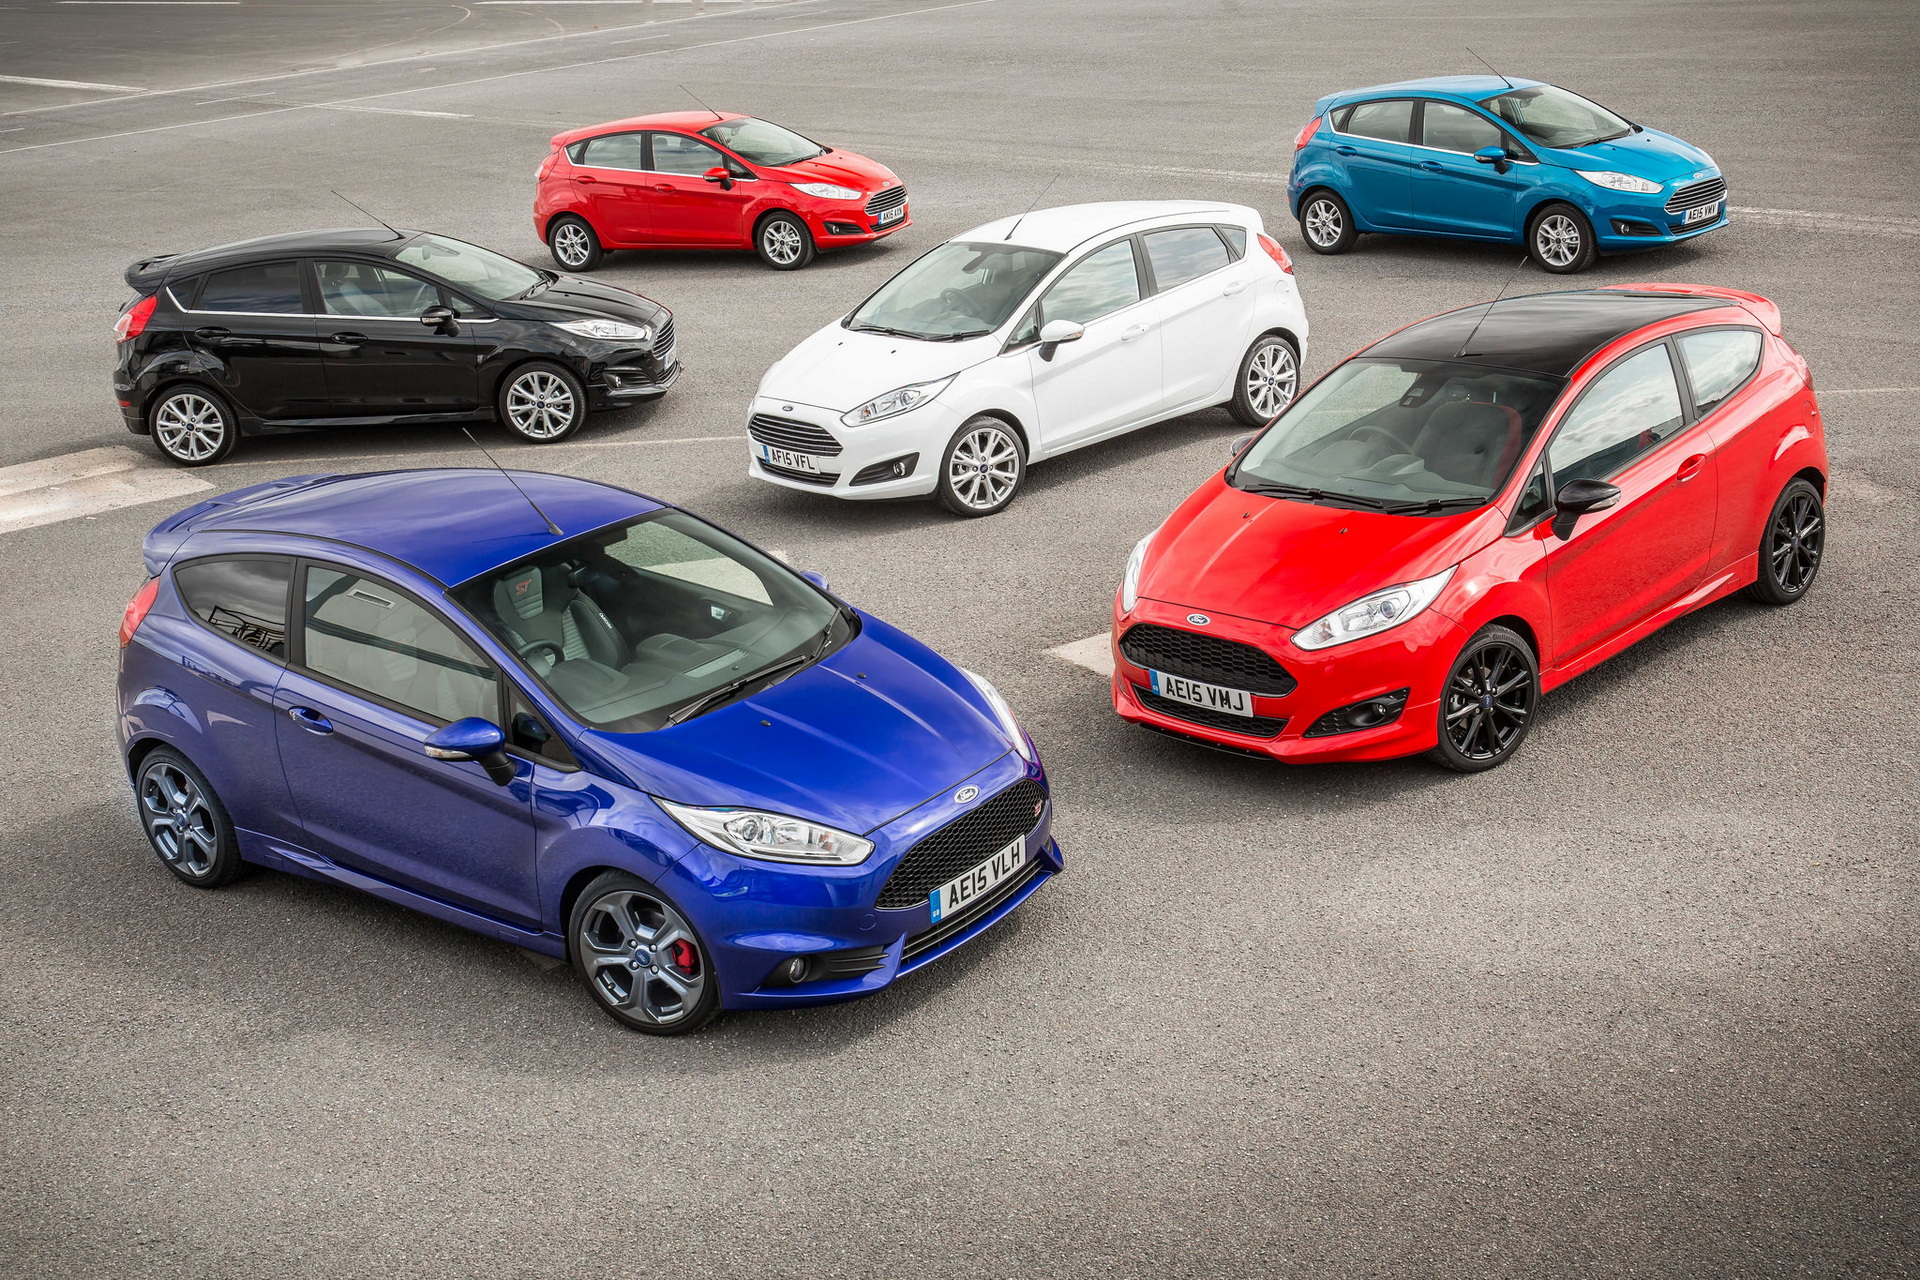 Ford Fiesta Production To End July 7, Final Two Cars Heading To Brand's  Heritage Fleets